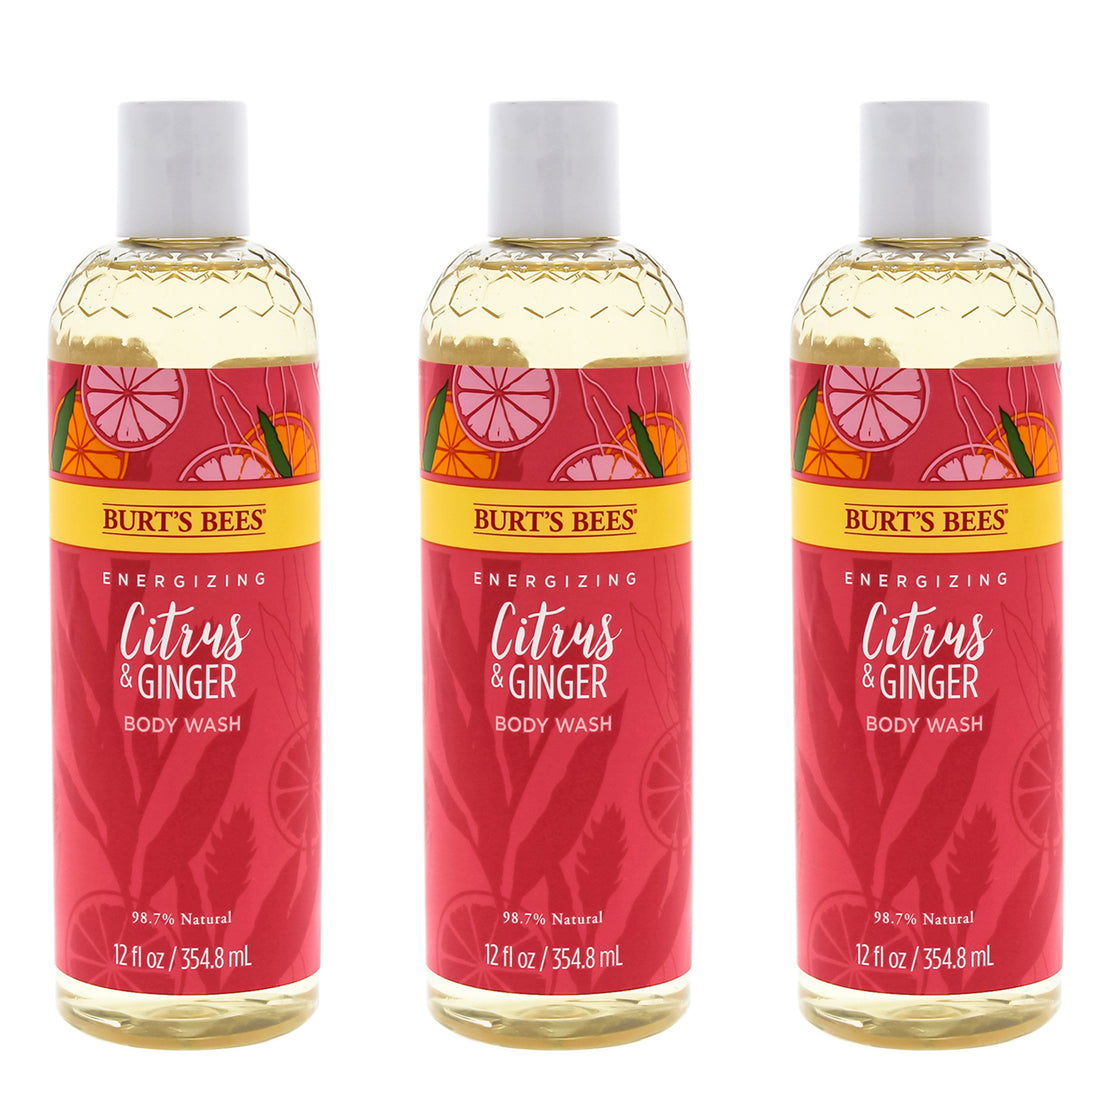 Energizing Citrus and Ginger Body Wash by Burts Bees for Women - 12 oz Body Wash - Pack of 3